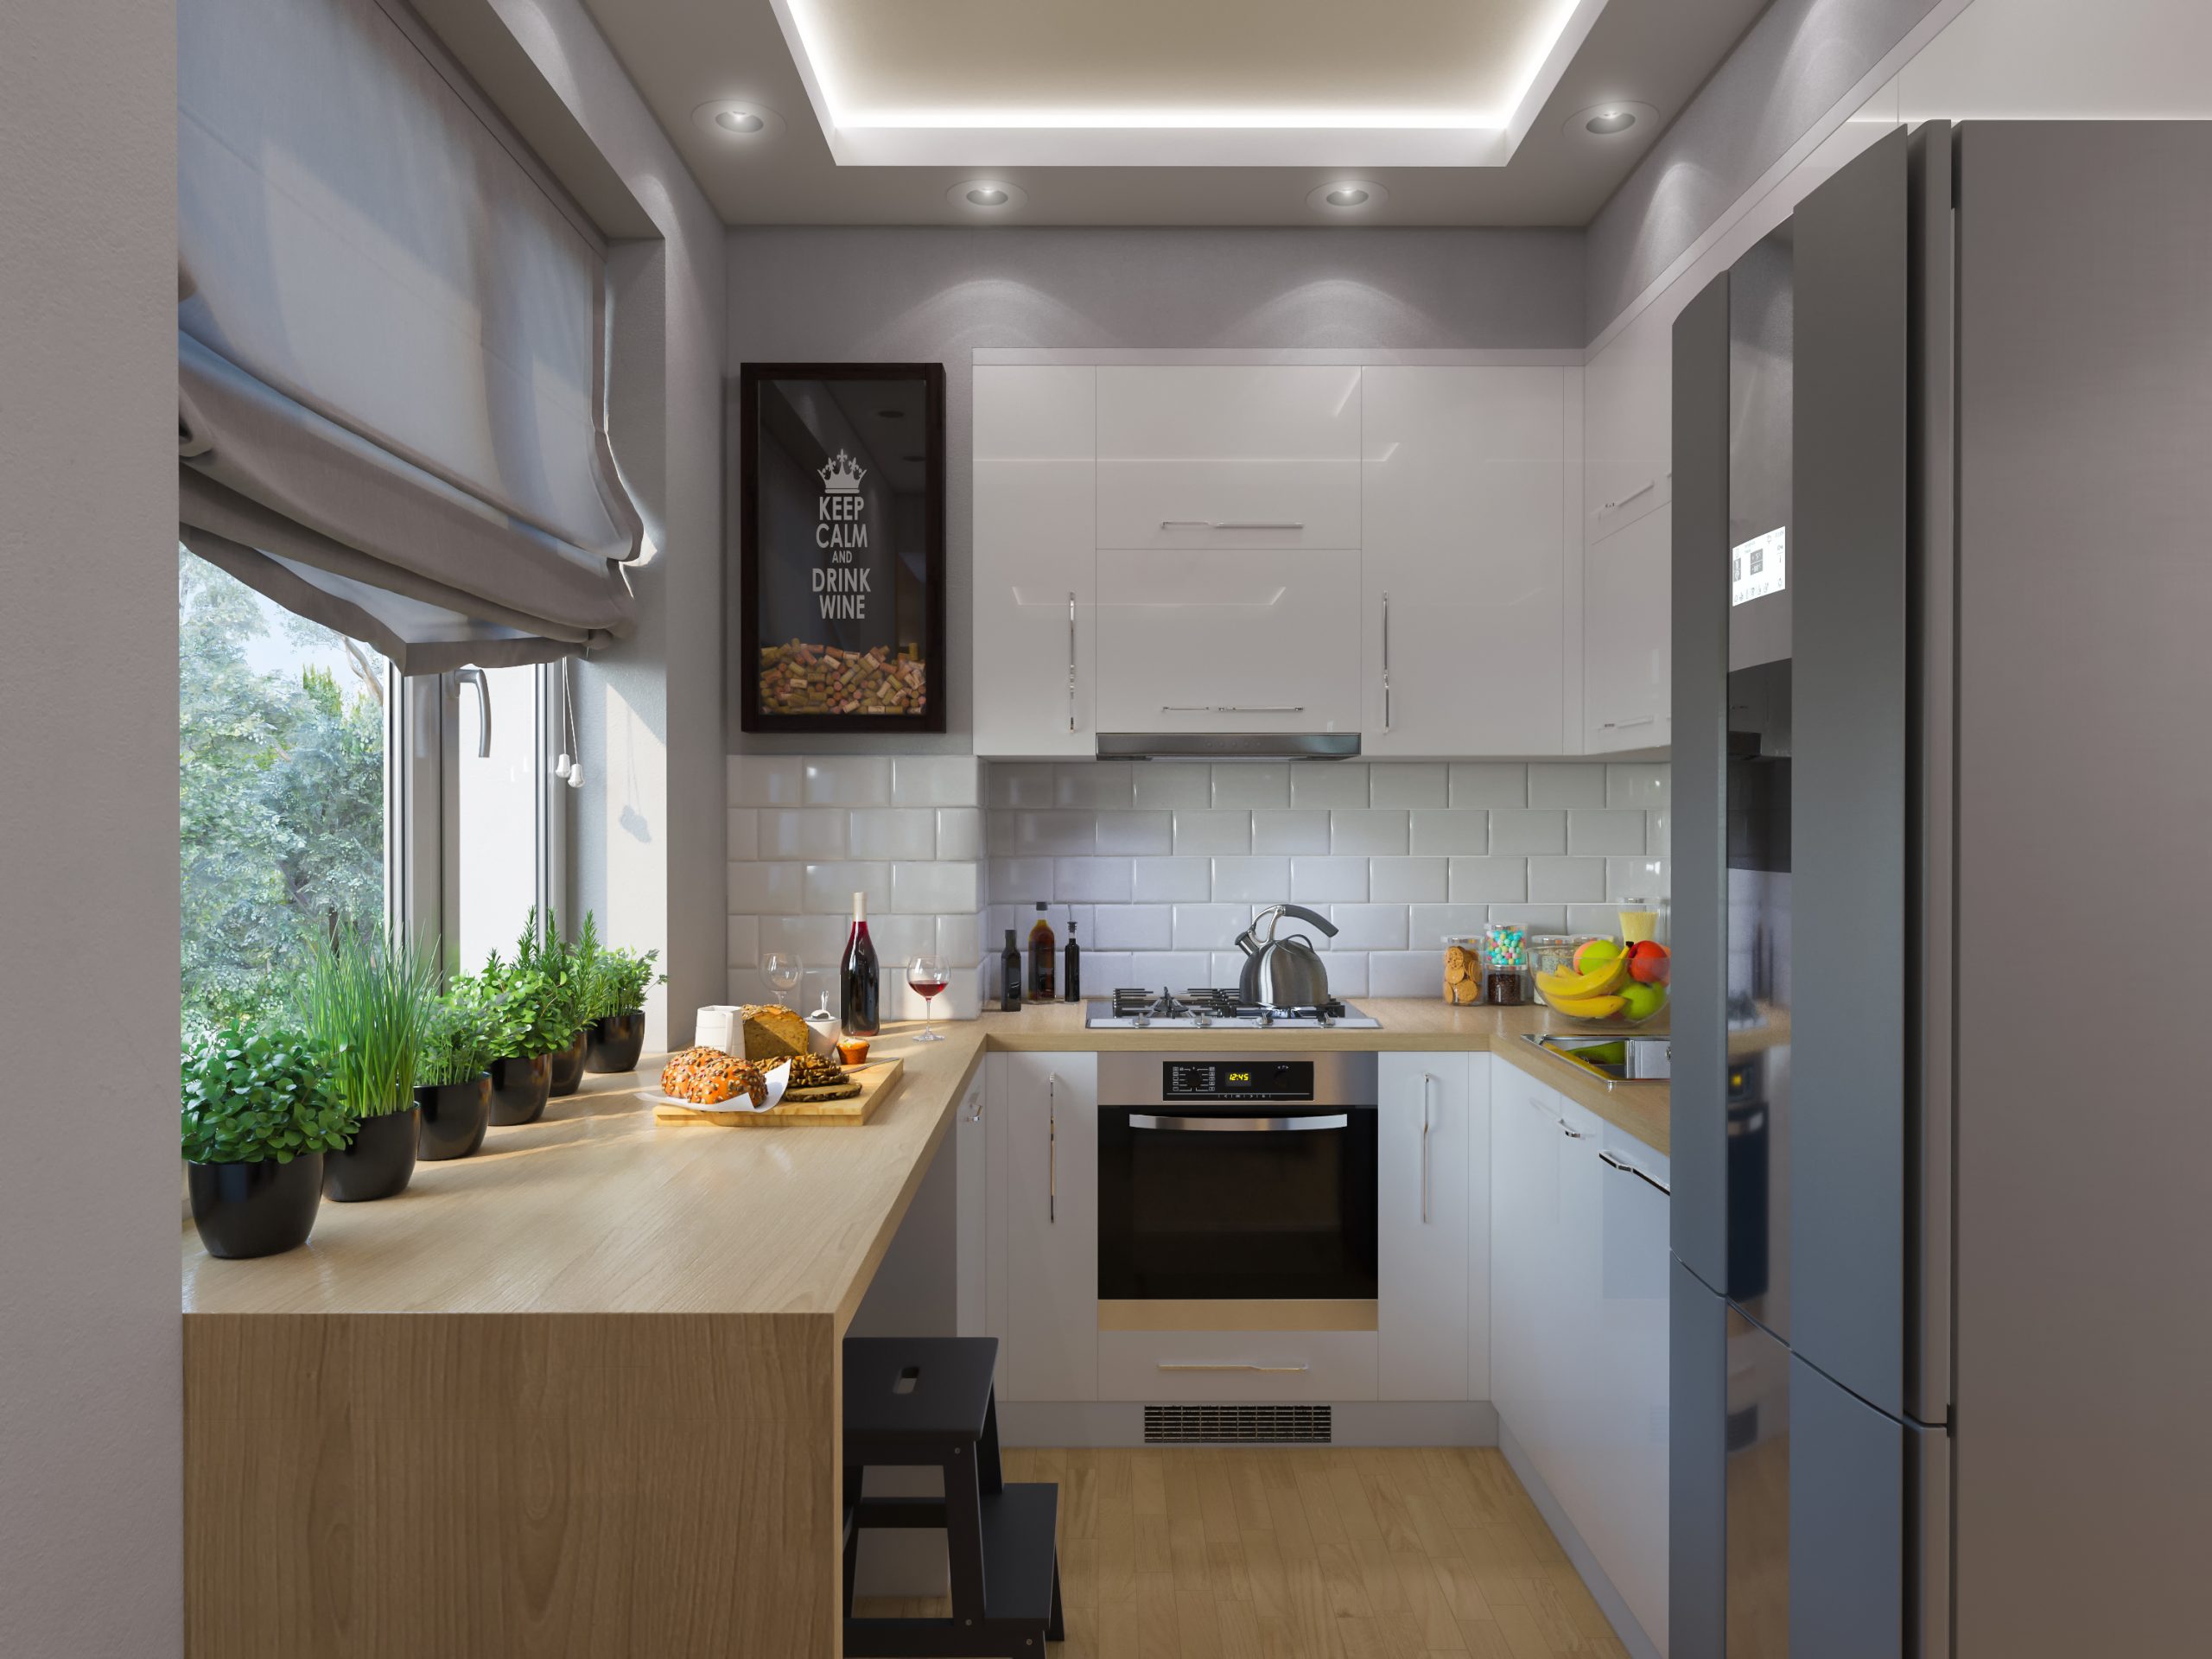 Fabulous Ideas For Your Small Kitchen